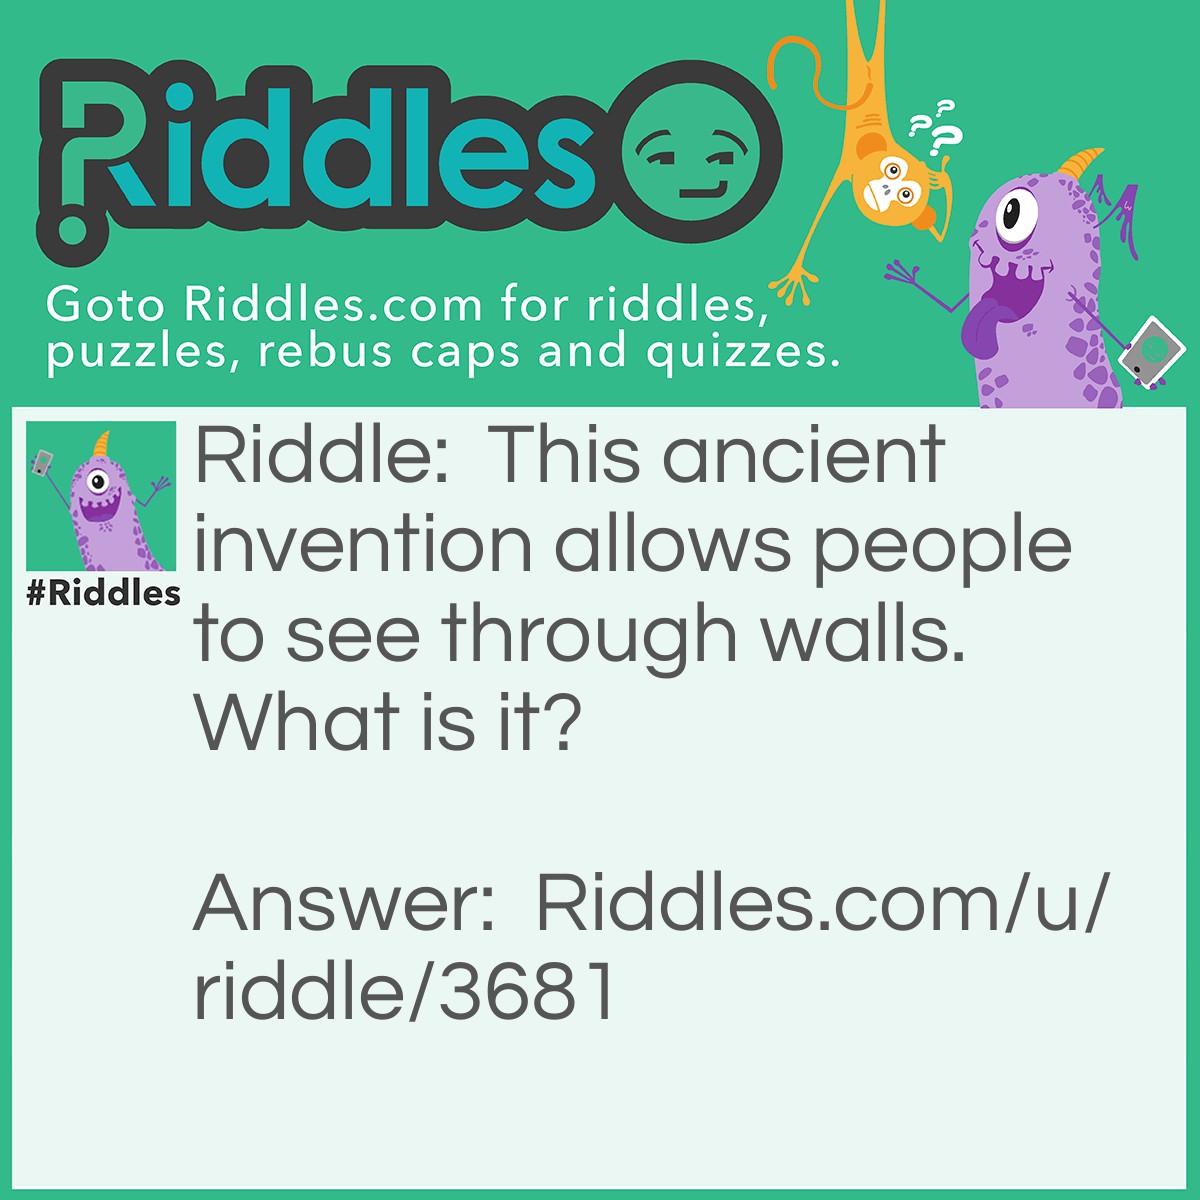 Riddle: This ancient invention allows people to see through walls. What is it? Answer: A window.